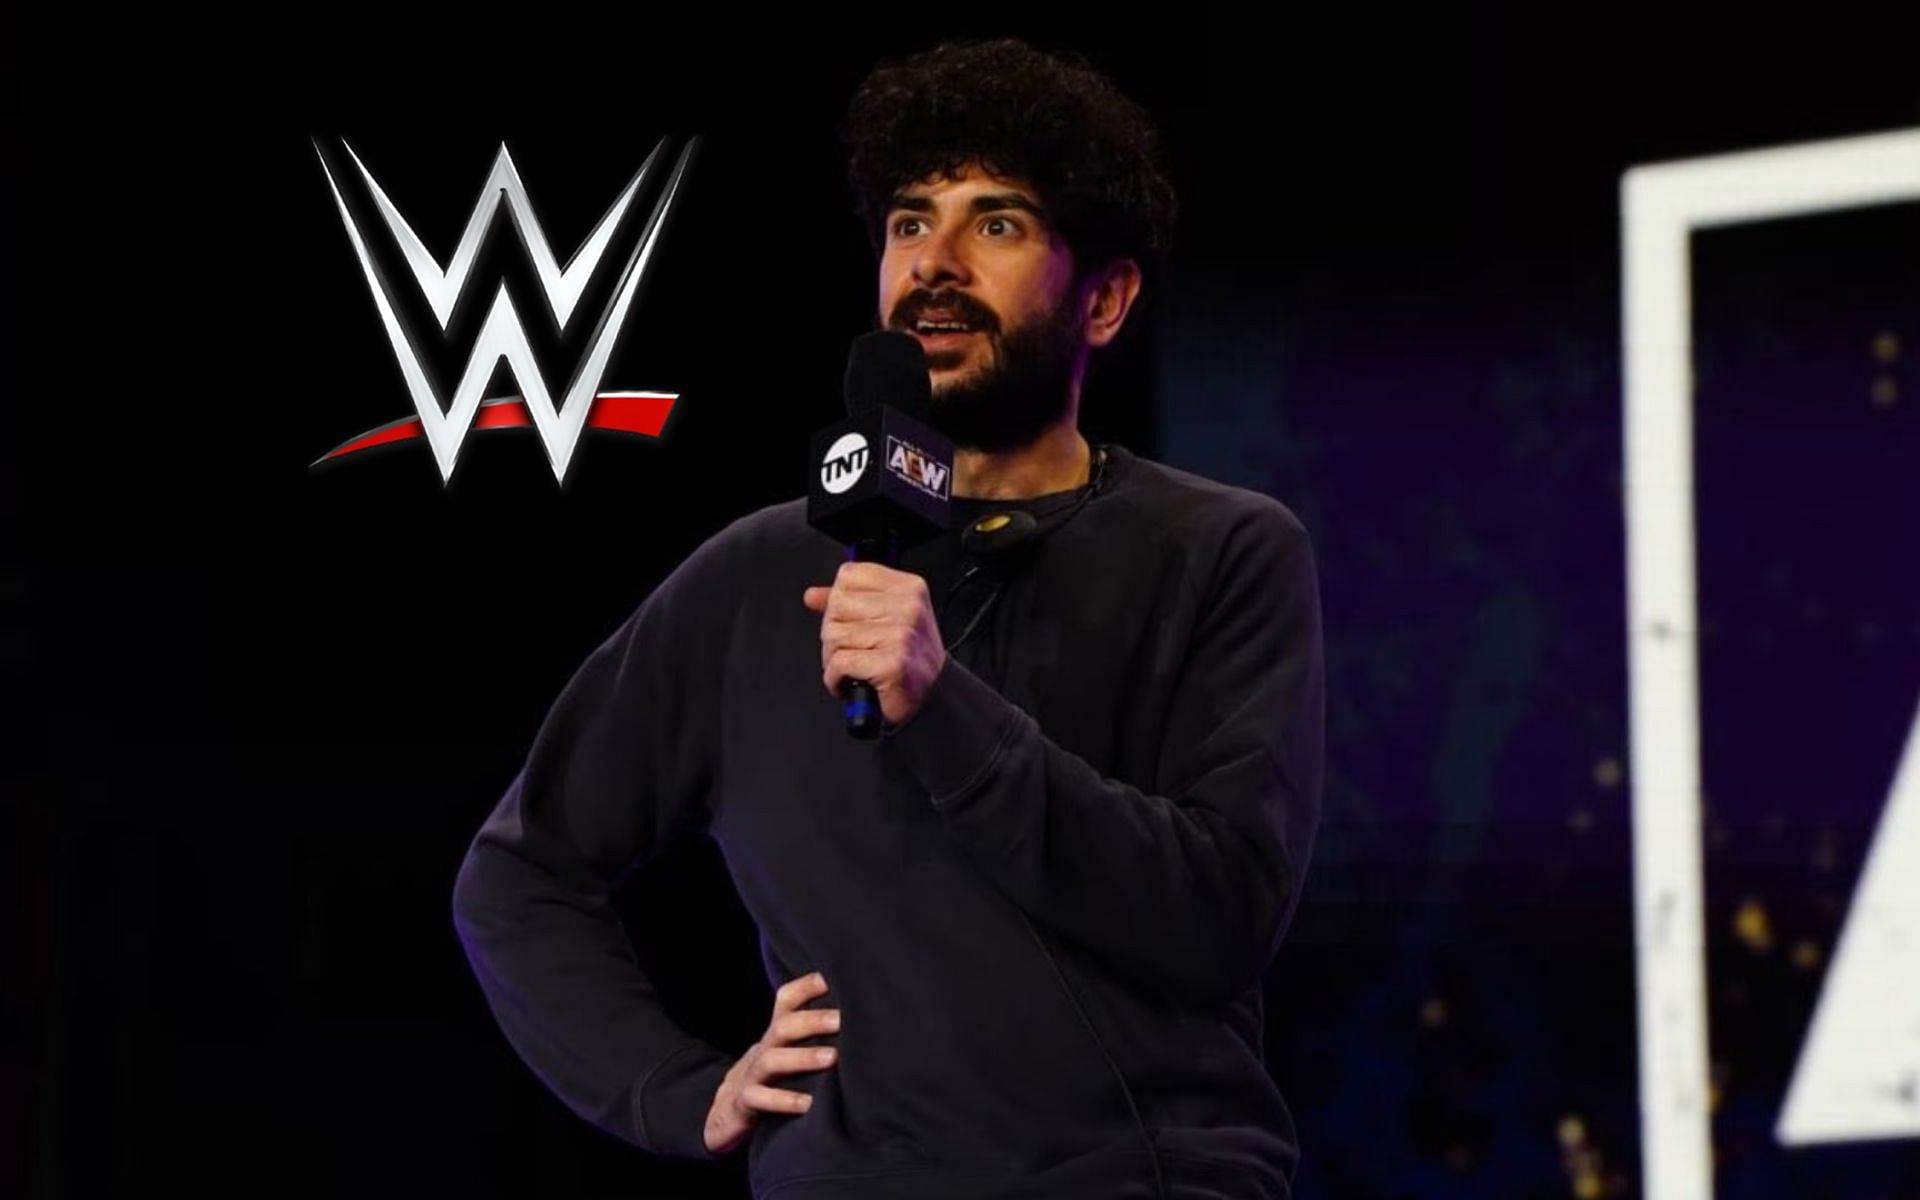 This ex-WWE talent commented on possibility of signing with AEW President Tony Khan.